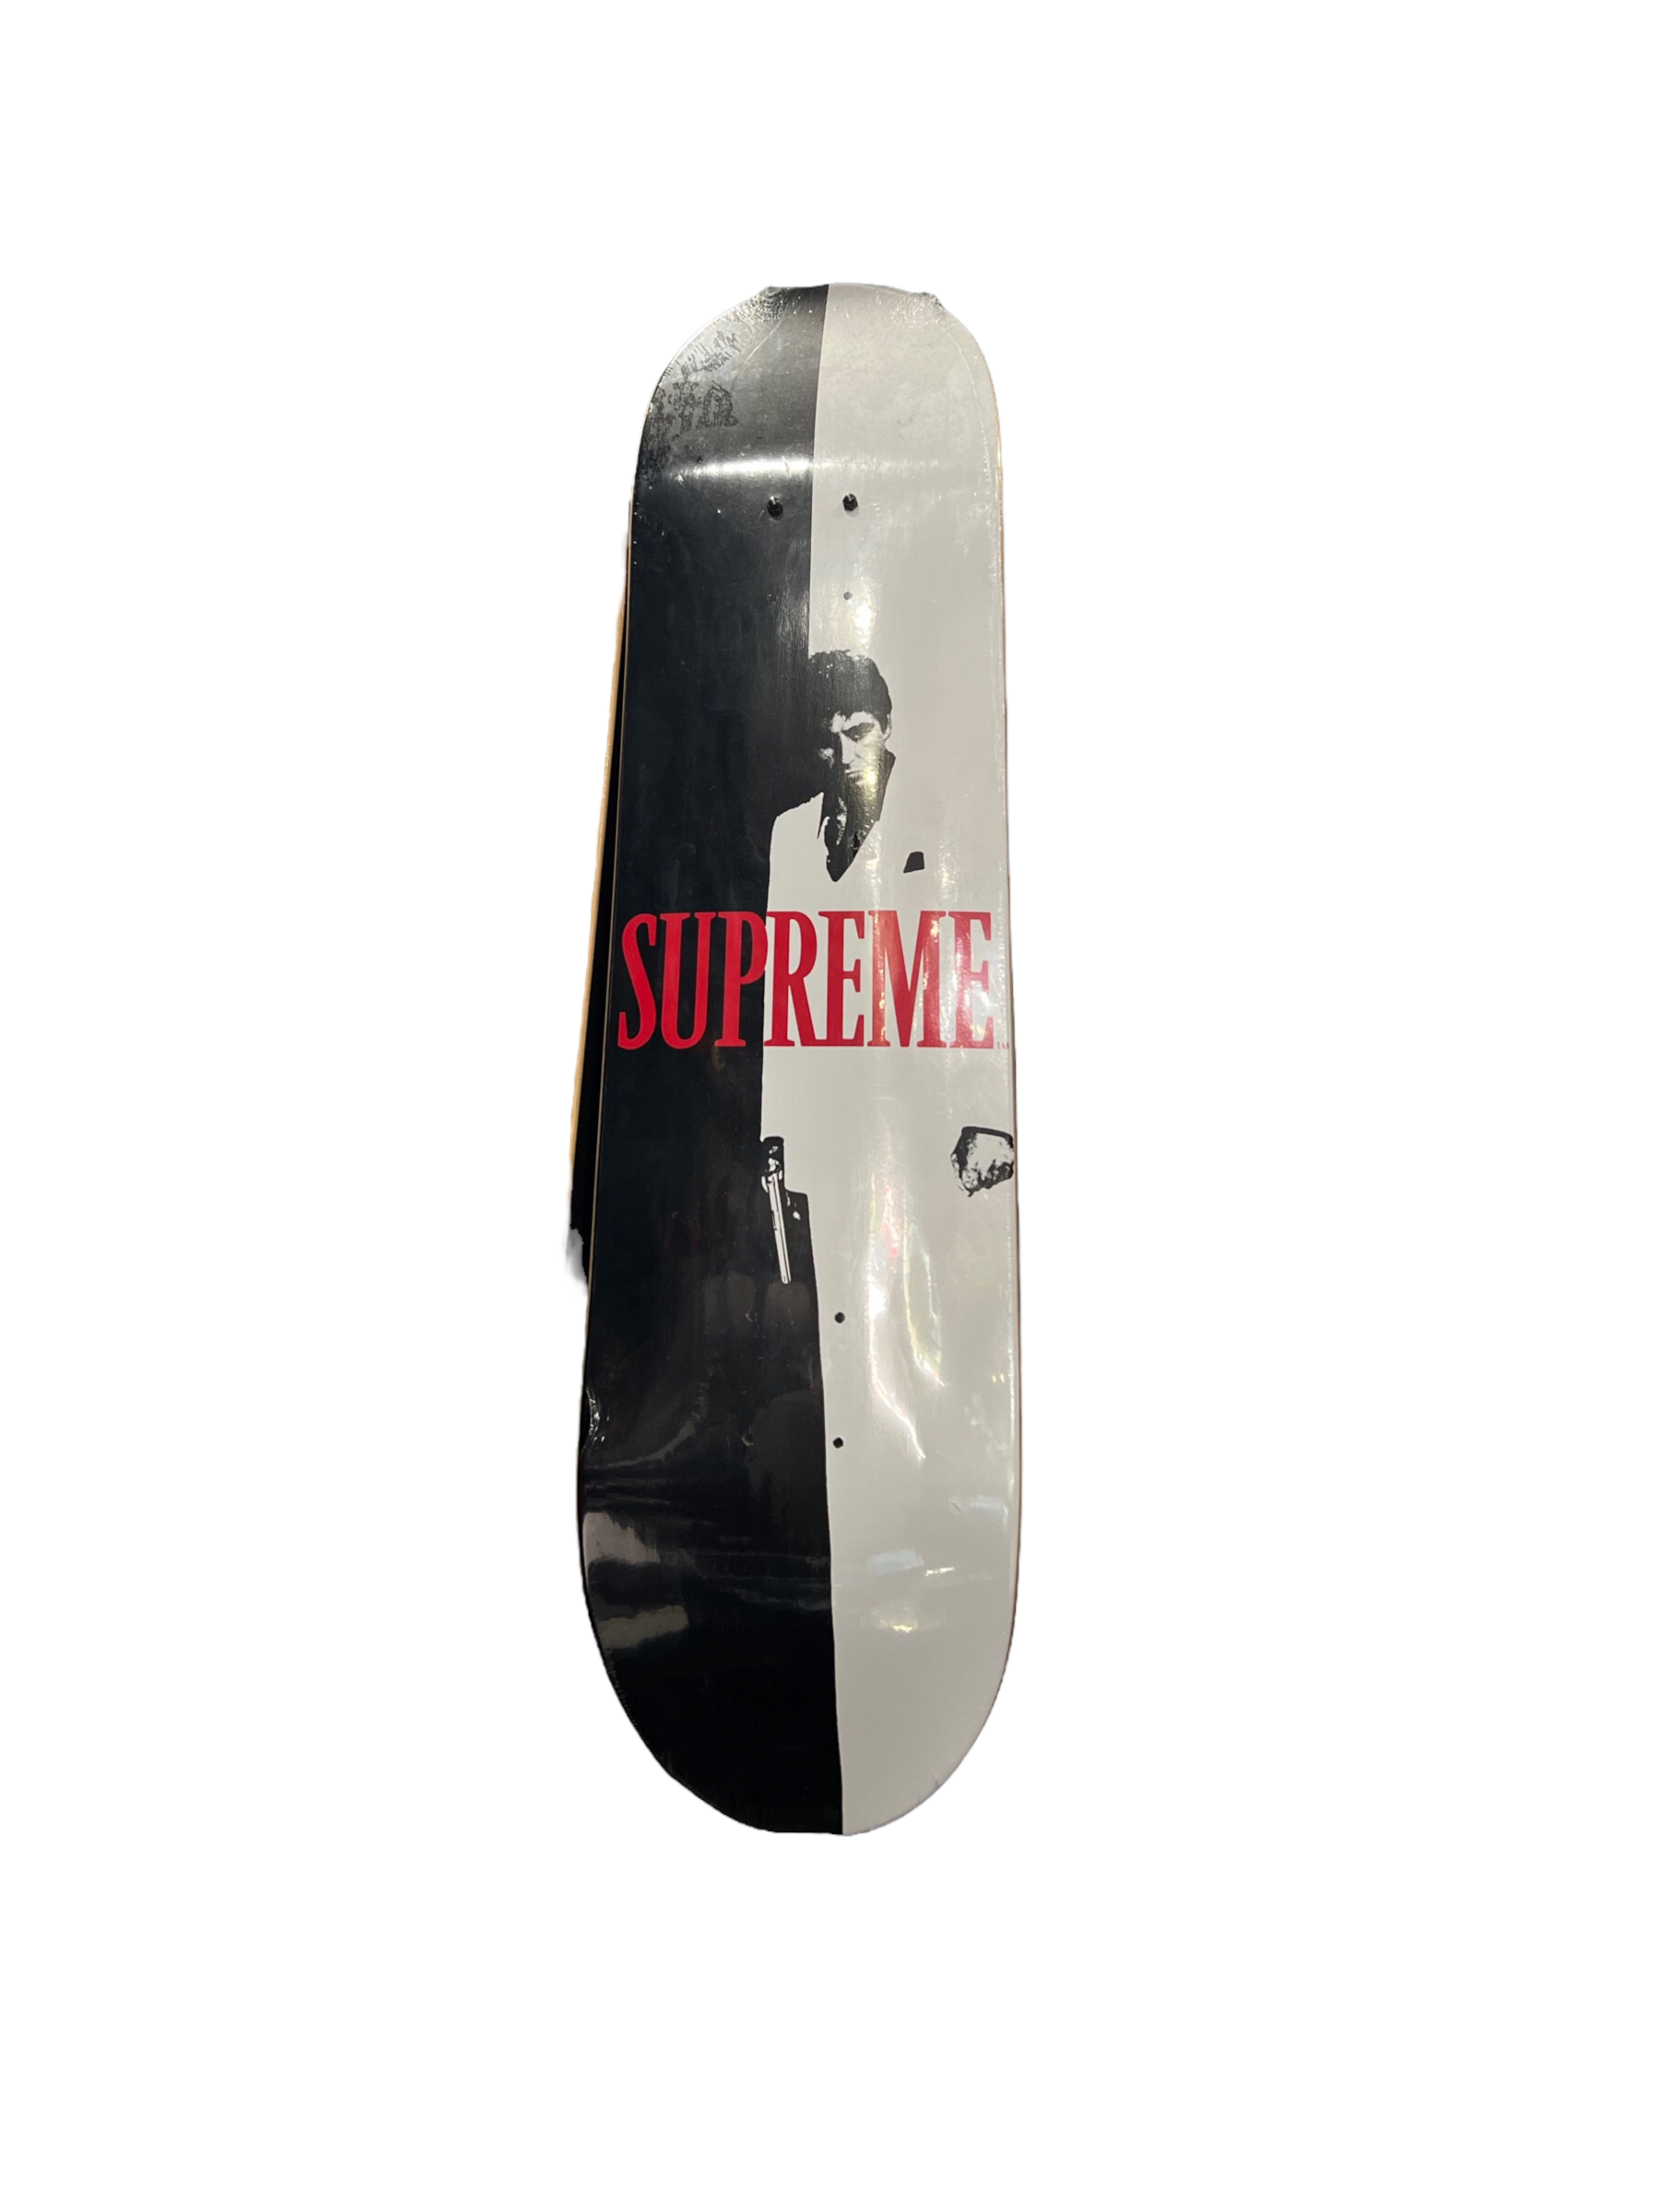 Supreme Deck “Scarface” – The Sole Broker